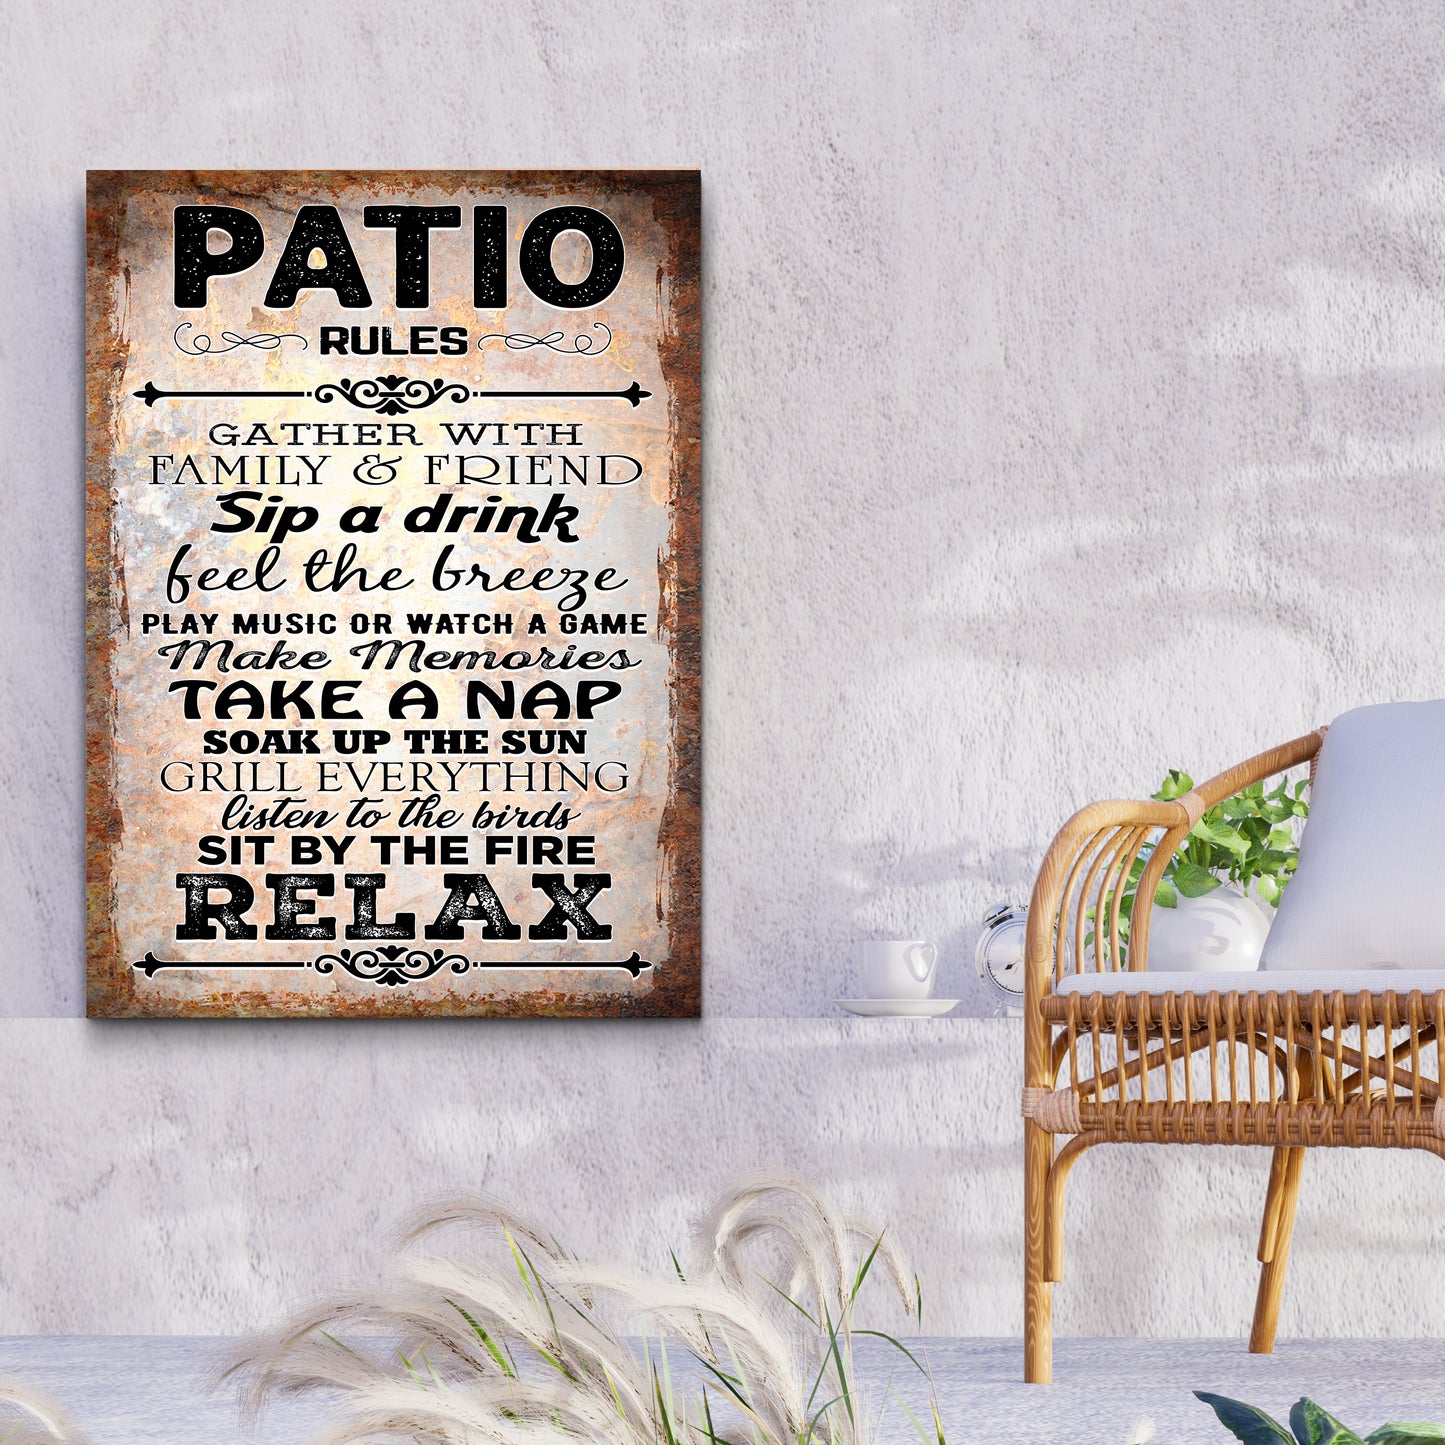 Patio Rules Sign II - Image by Tailored Canvases